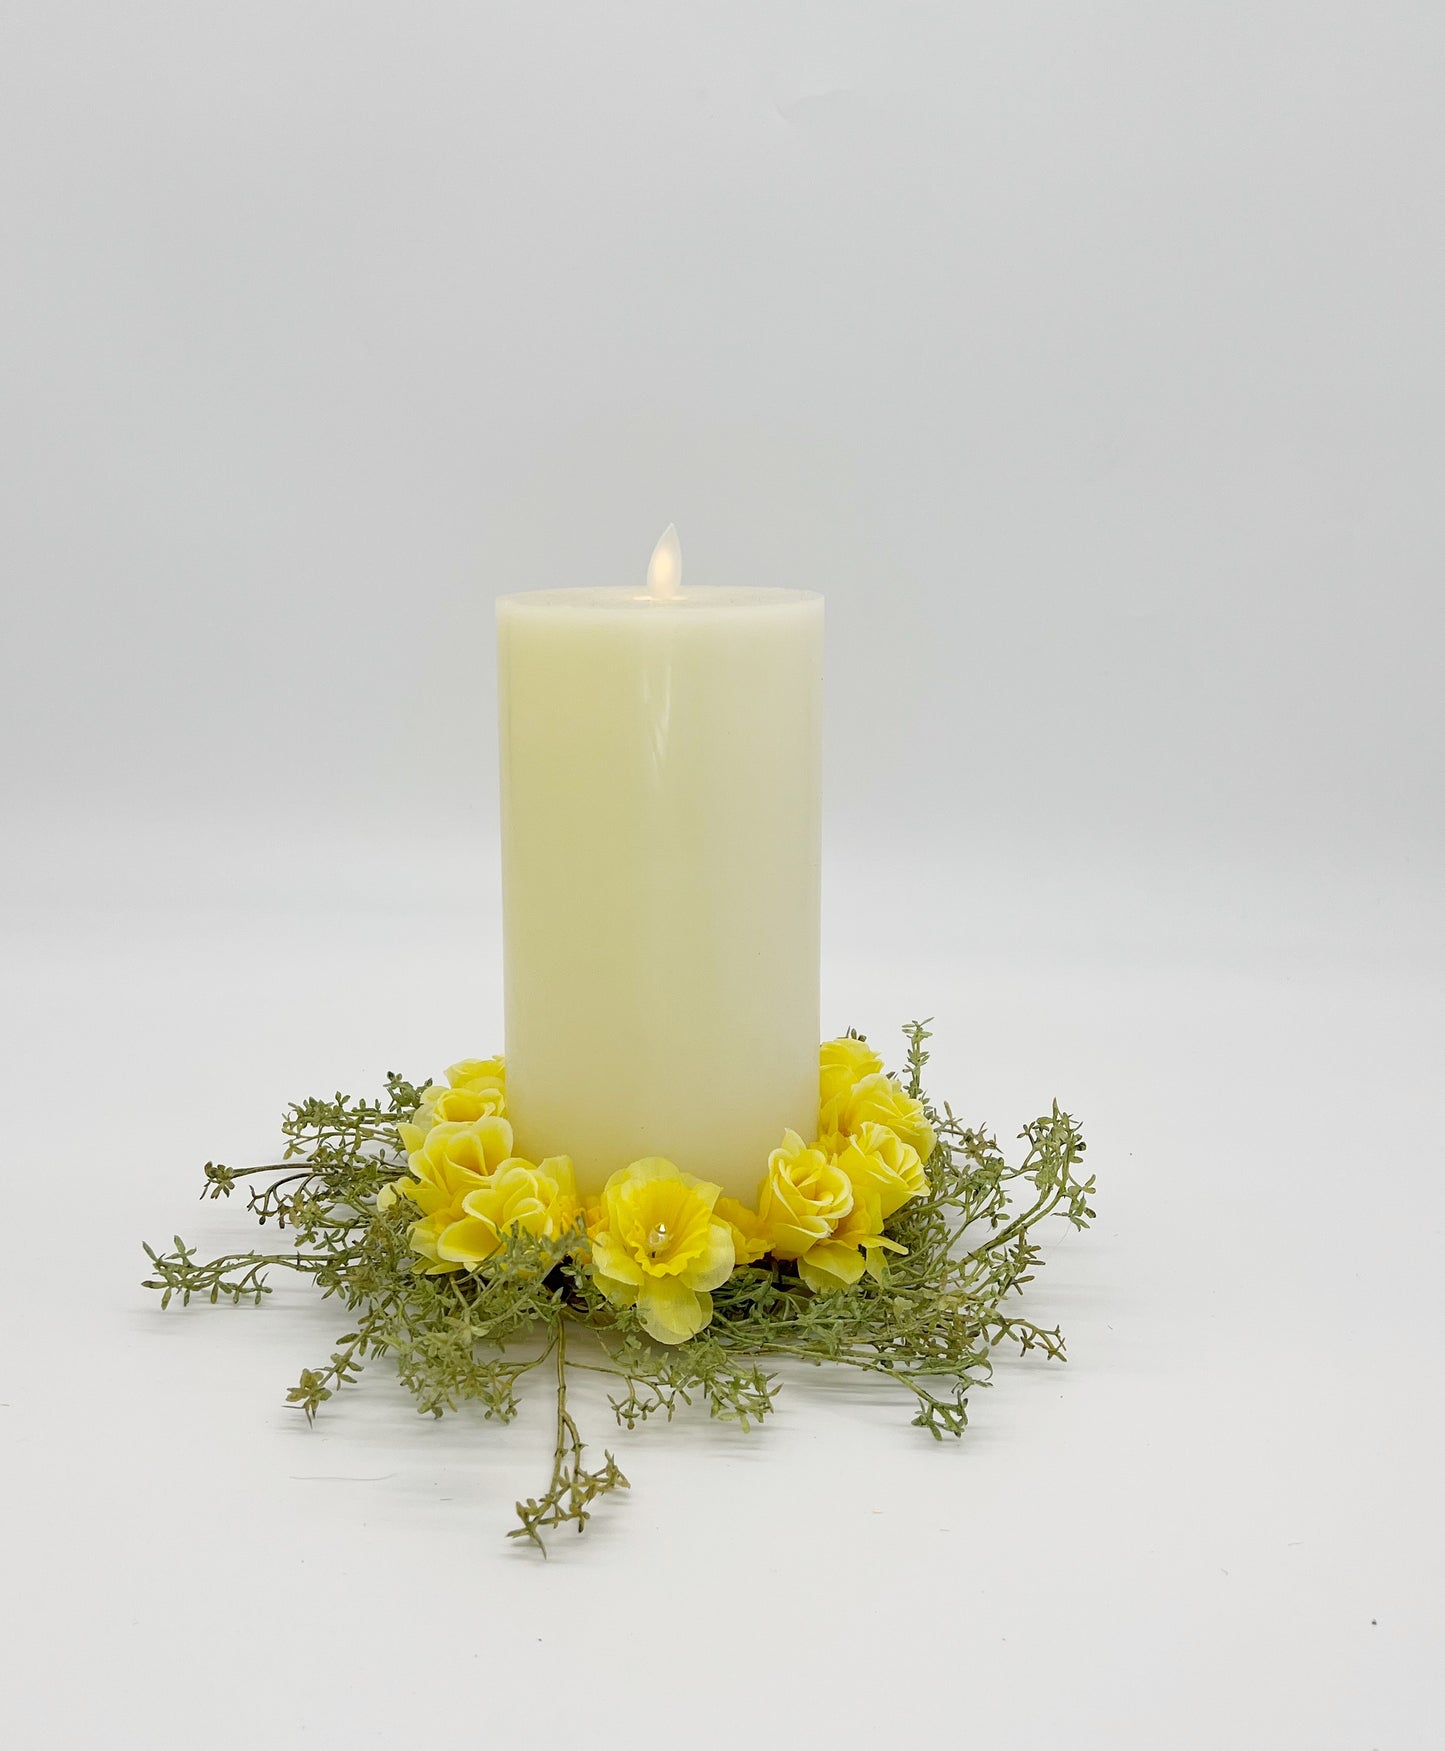 Daffodils and Roses Candle Wreath